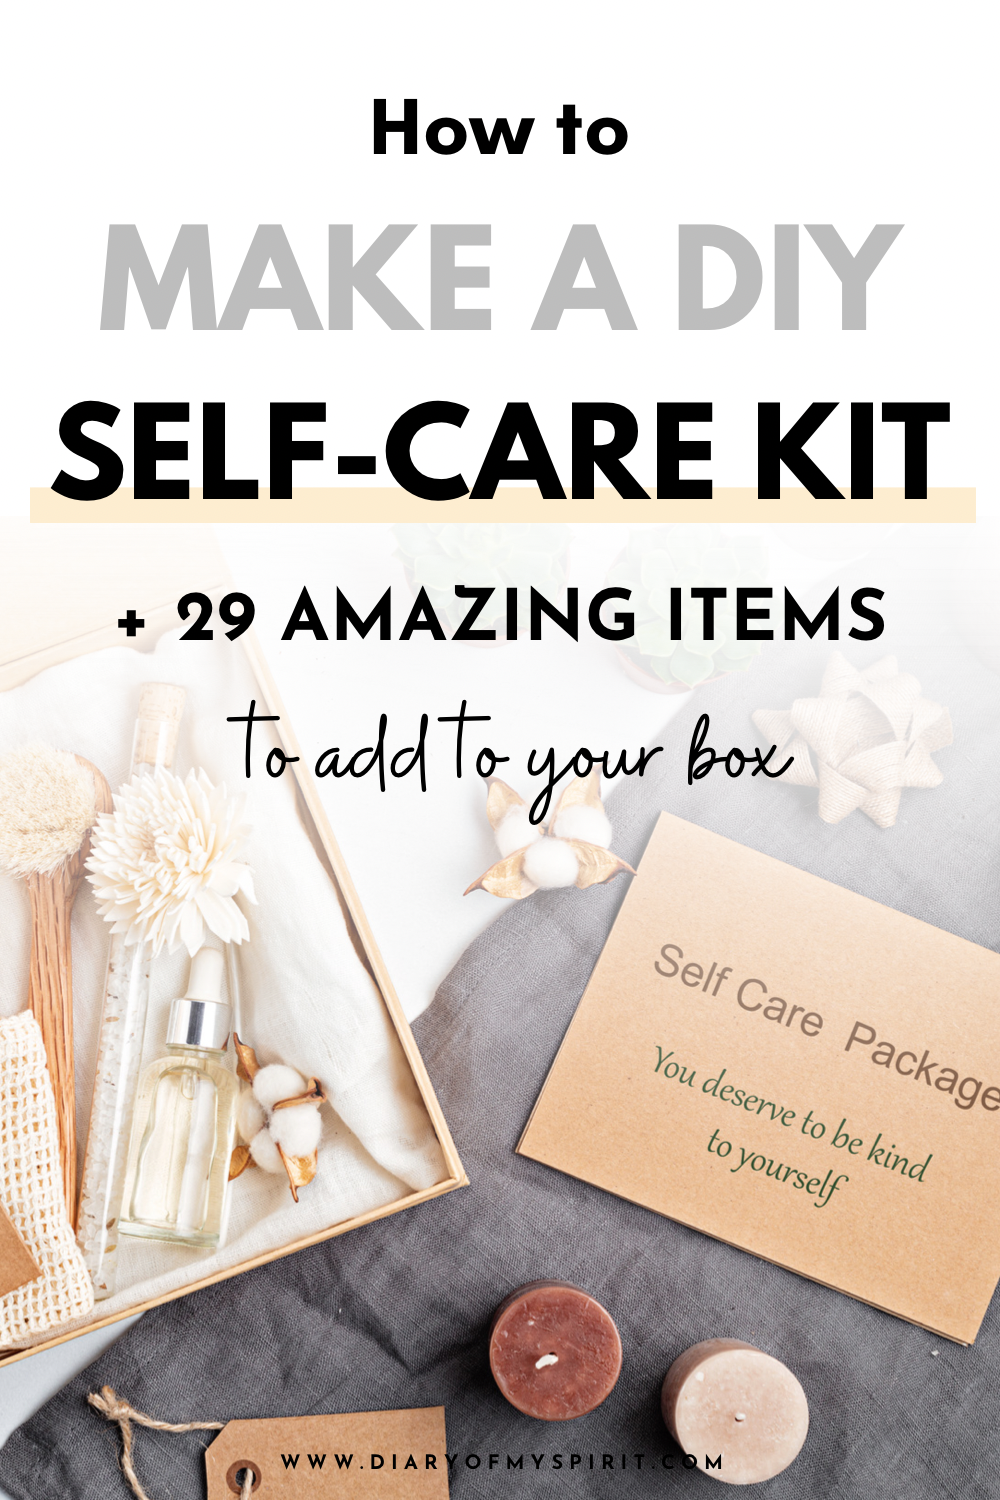 How to make a DIY self cake kit. self care kit ideas. self care box gift box ideas. what to put in a self care bok. self care package, basket, hamper kit for women.